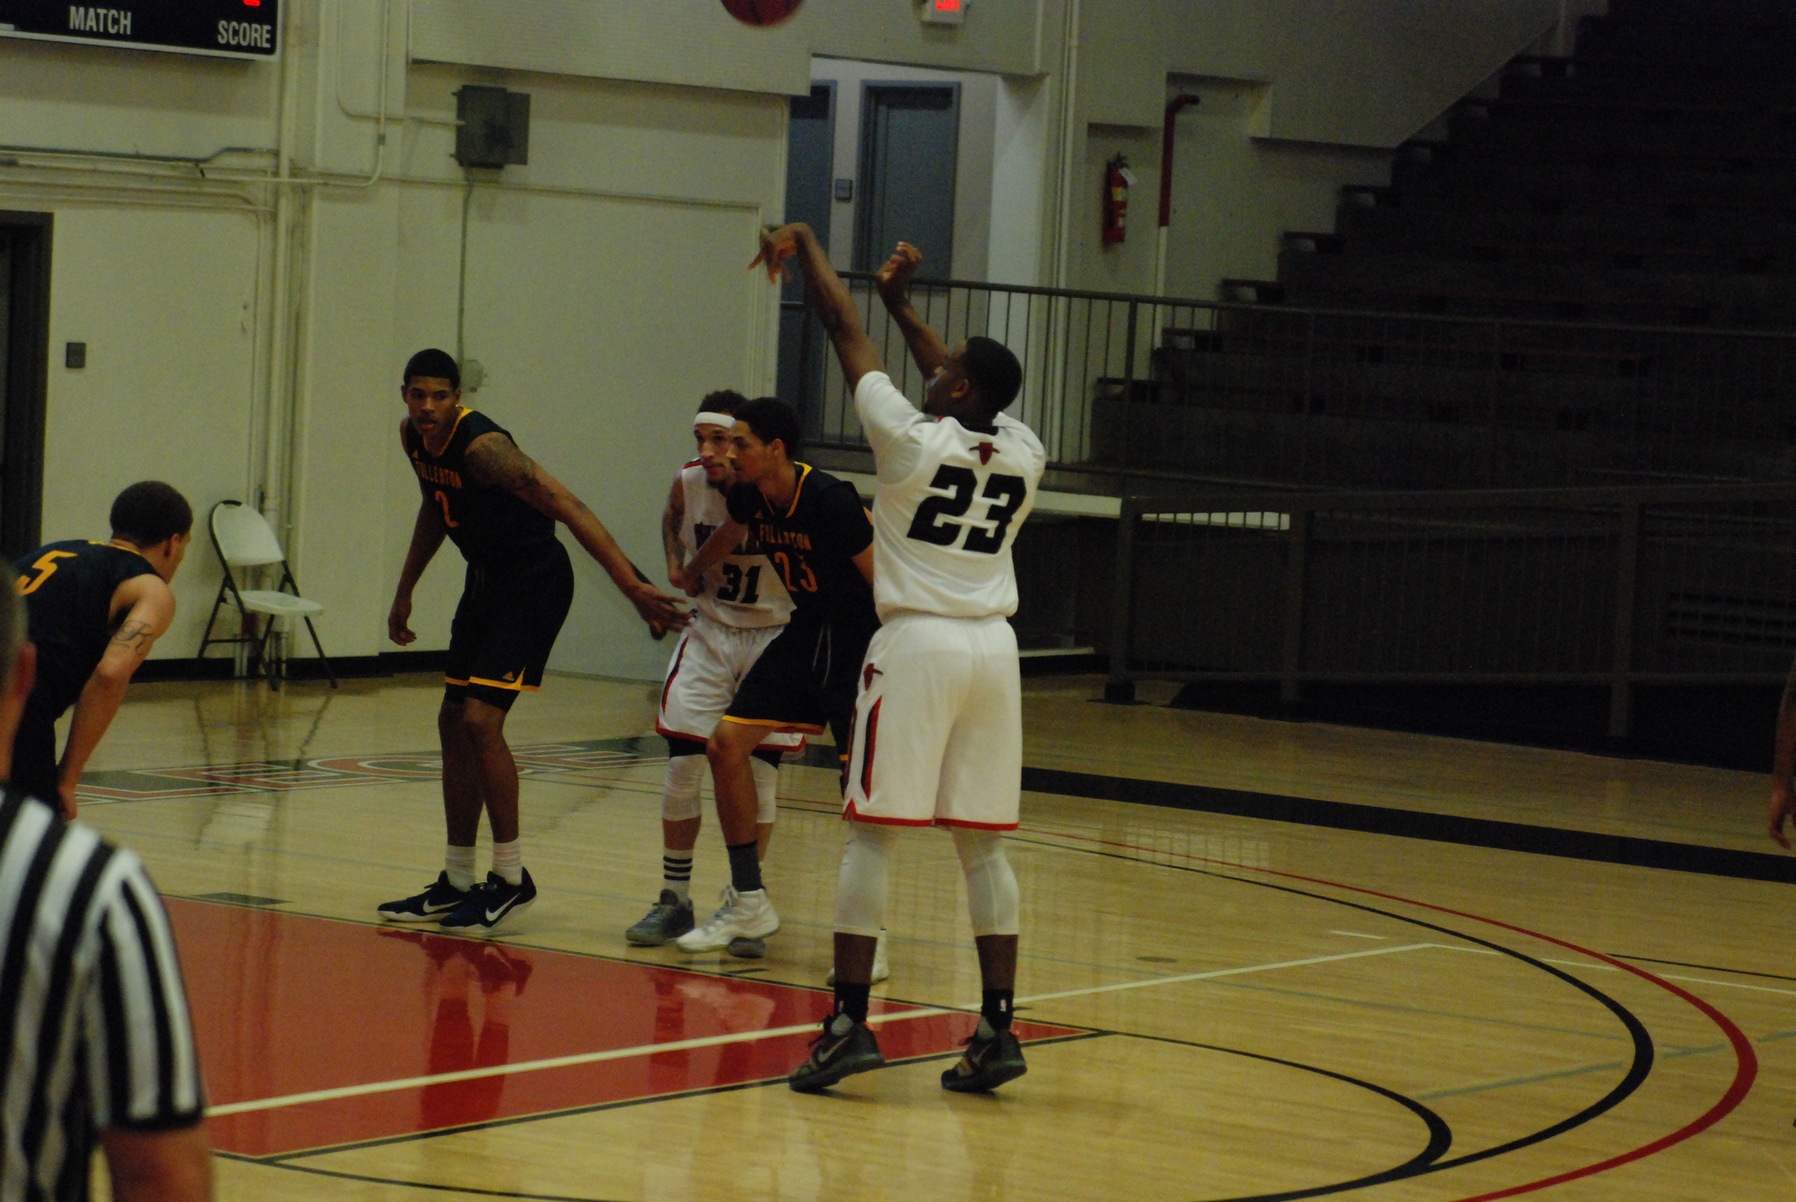 Dons men’s basketball (6-14, 1-3) defeated Orange Coast College (7-12, 0-4) in the first Orange Empire Conference win of the season 102-95.